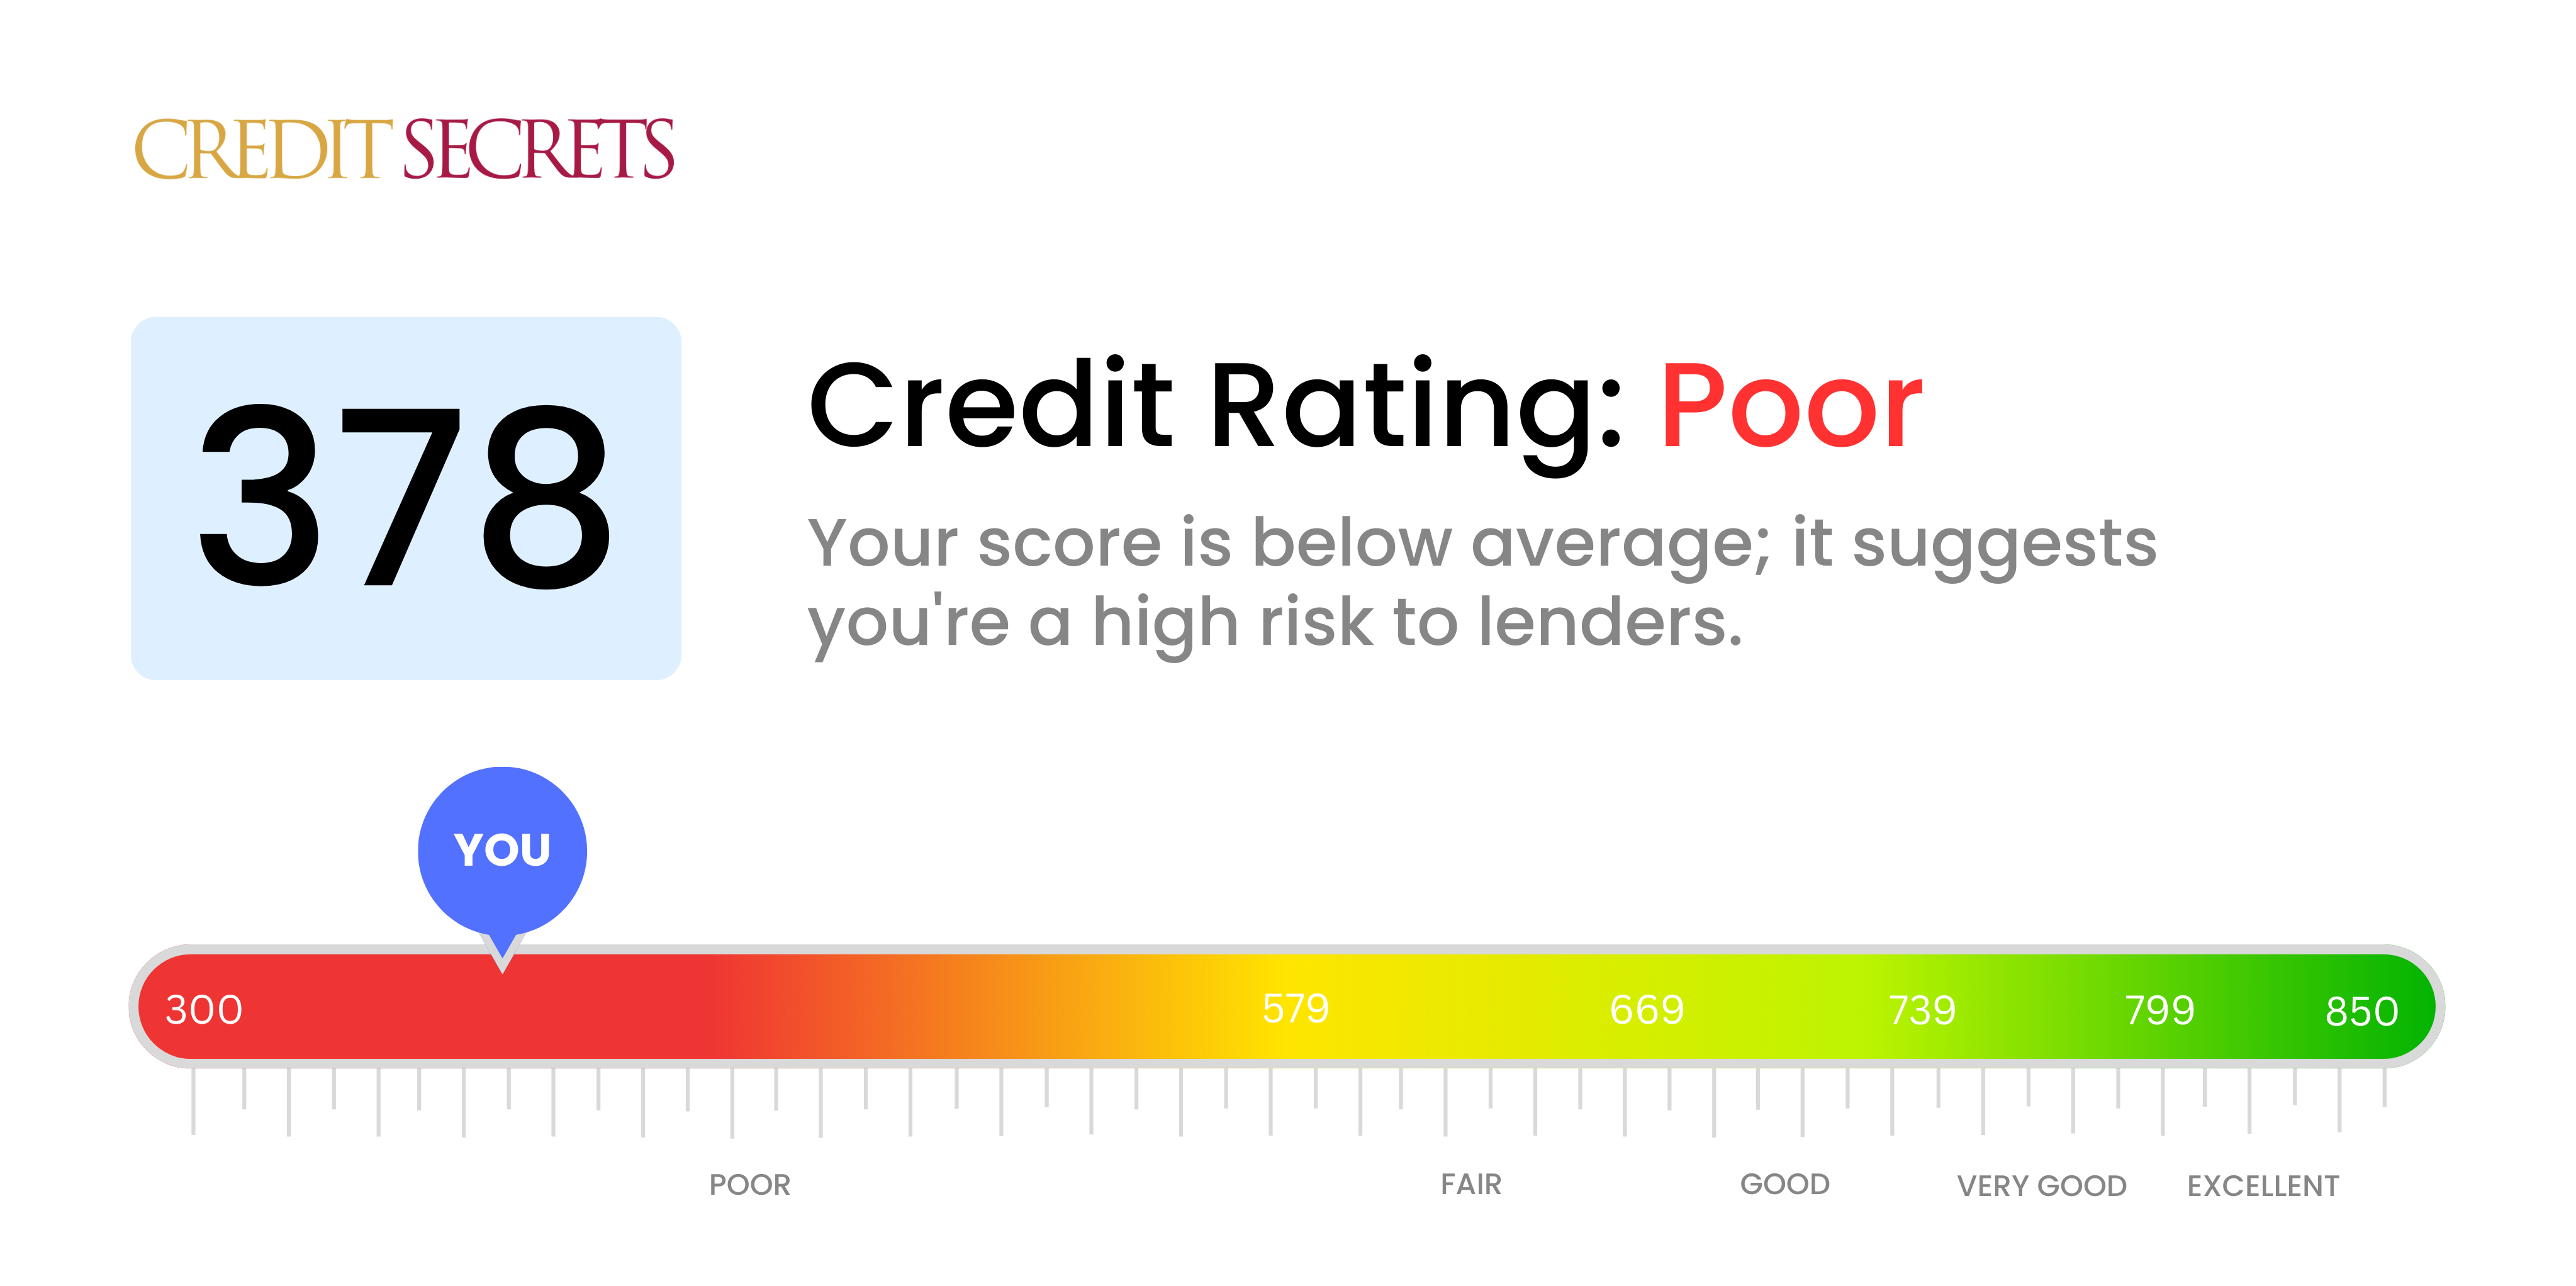 Is 378 a good credit score?